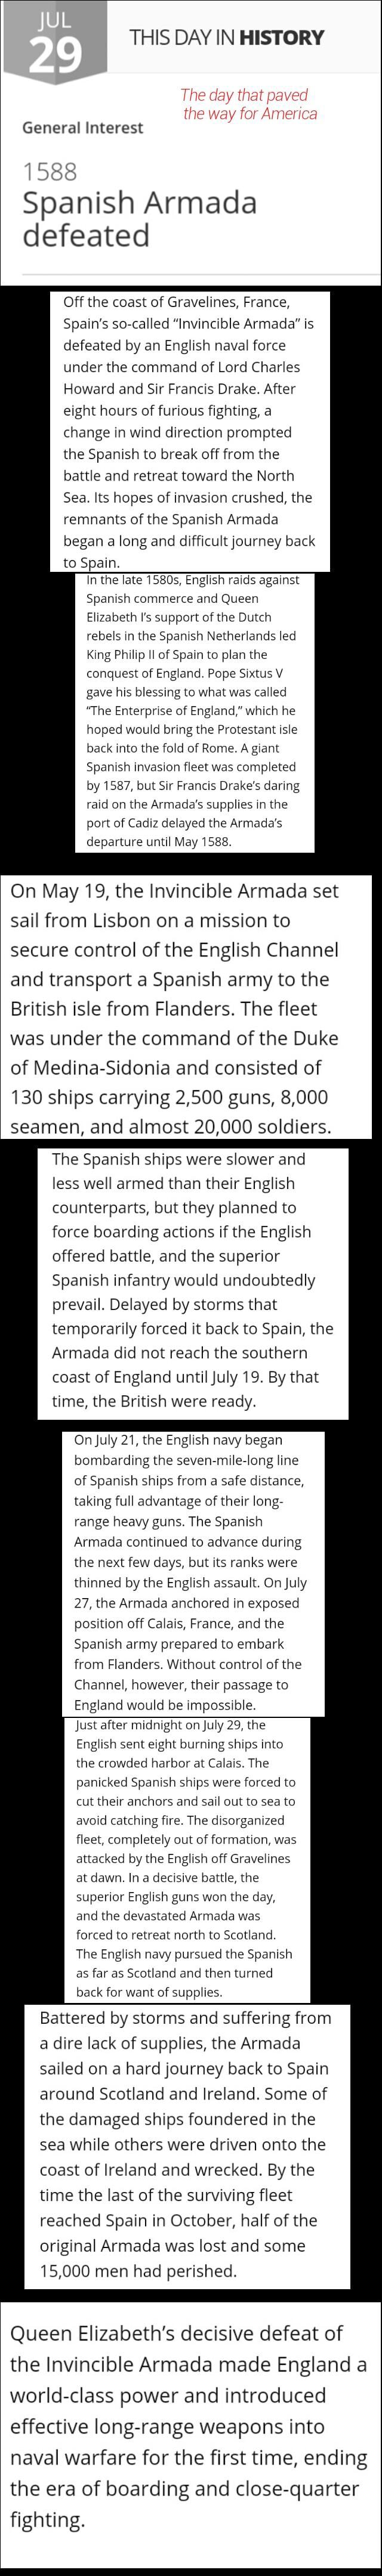 naval battles between the english fleet and the spanish armada could be summed up as